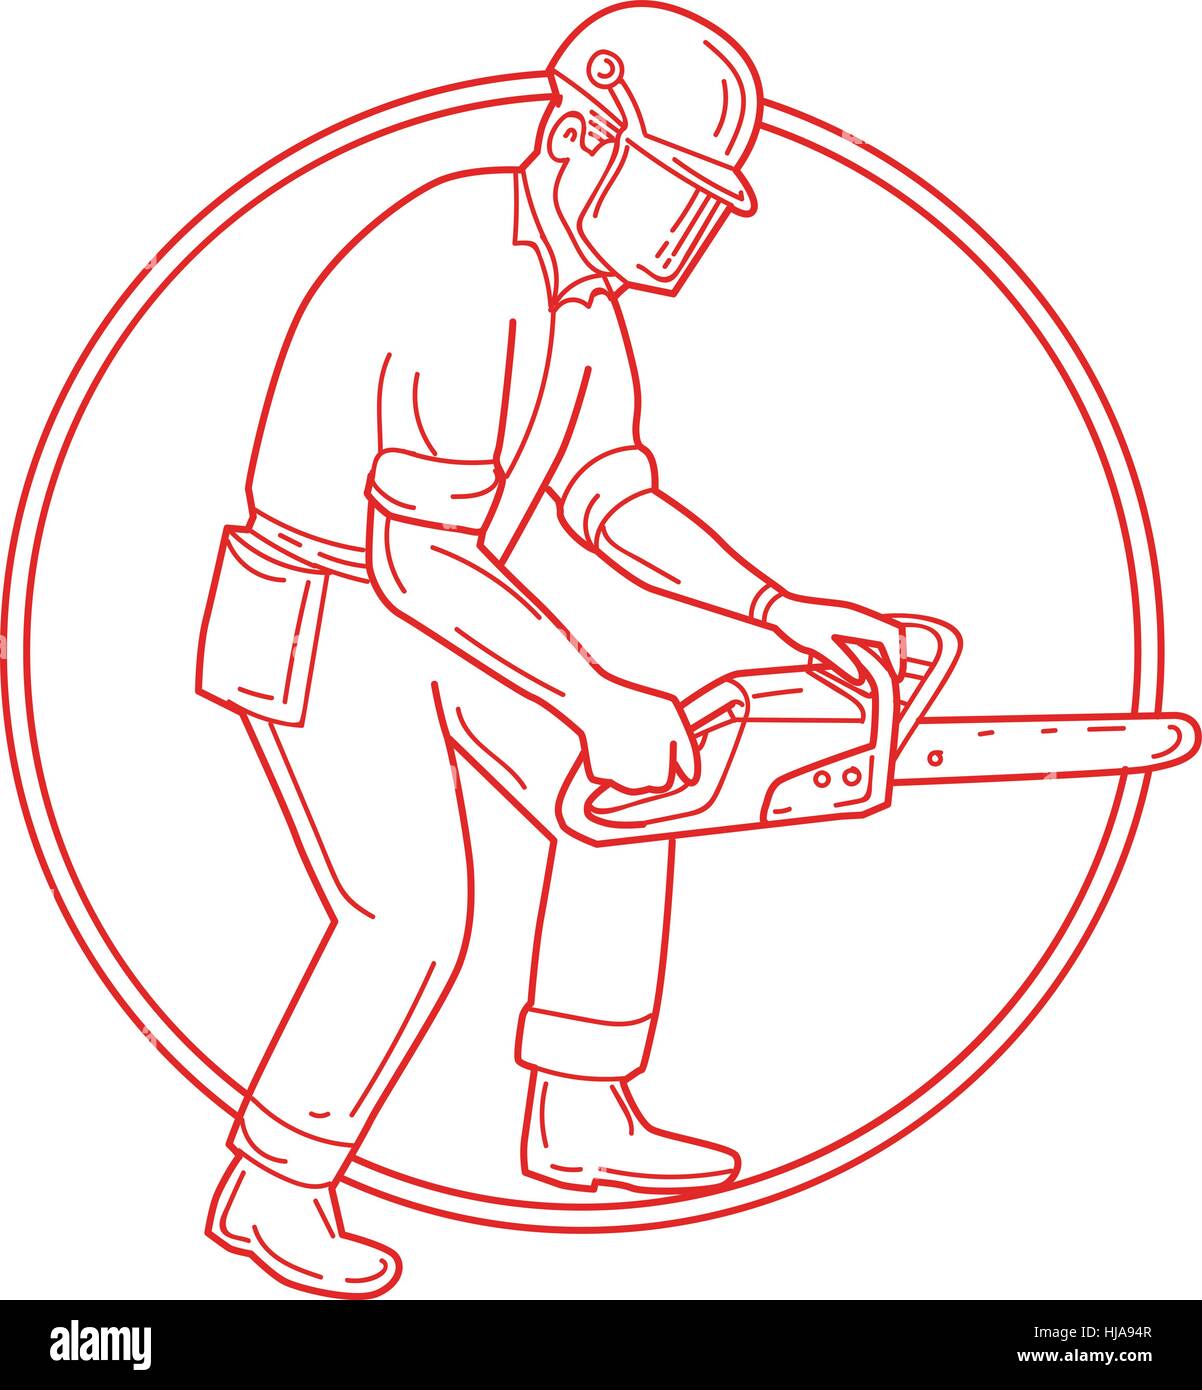 Mono line style illustration of lumberjack arborist tree surgeon wearing helmet protective gear holding operating a chainsaw viewed from the side set Stock Vector